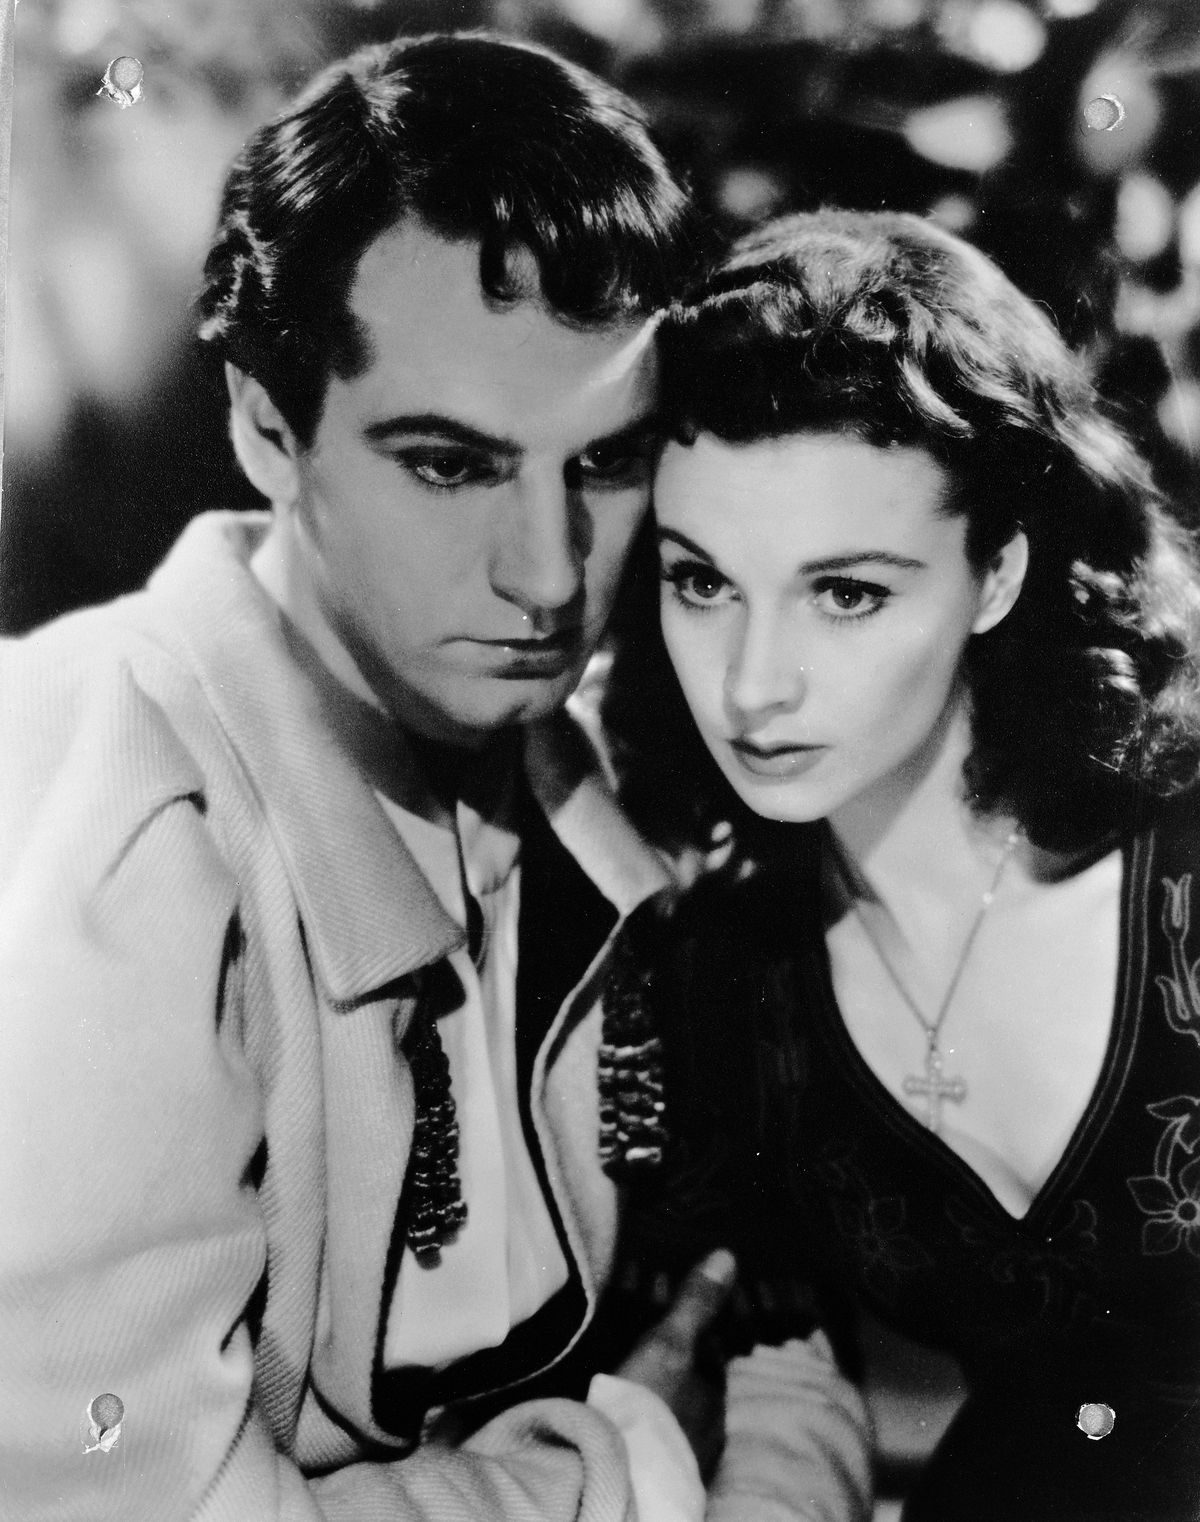 Forced White Wife Interracial - A Timeline of Vivien Leigh and Laurence Olivier's Tragic Love Story as Told  Through Love Letters